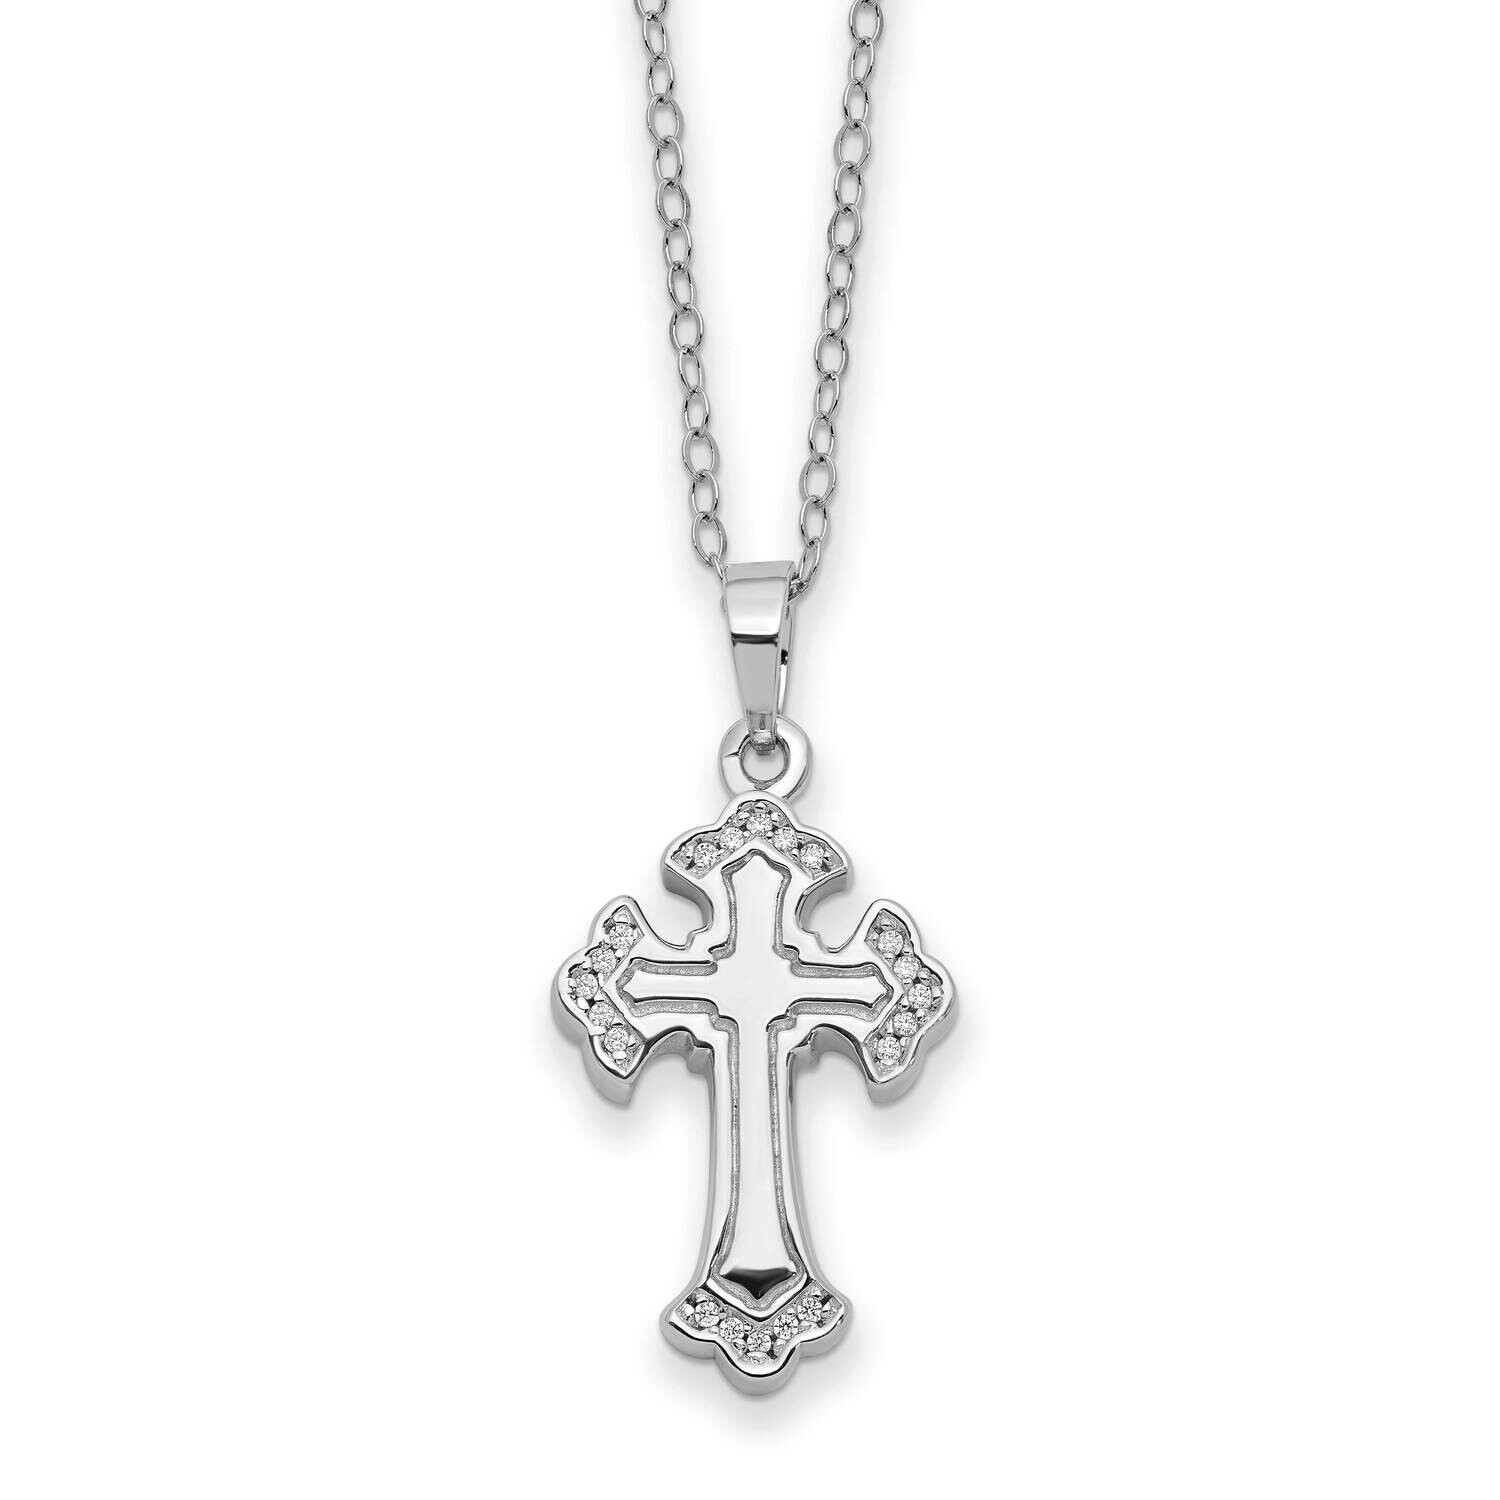 Sentimental Expressions CZ Eternal Home Cross Ash Holder 18 Inch Necklace Sterling Silver Rhodium-Plated QSX776